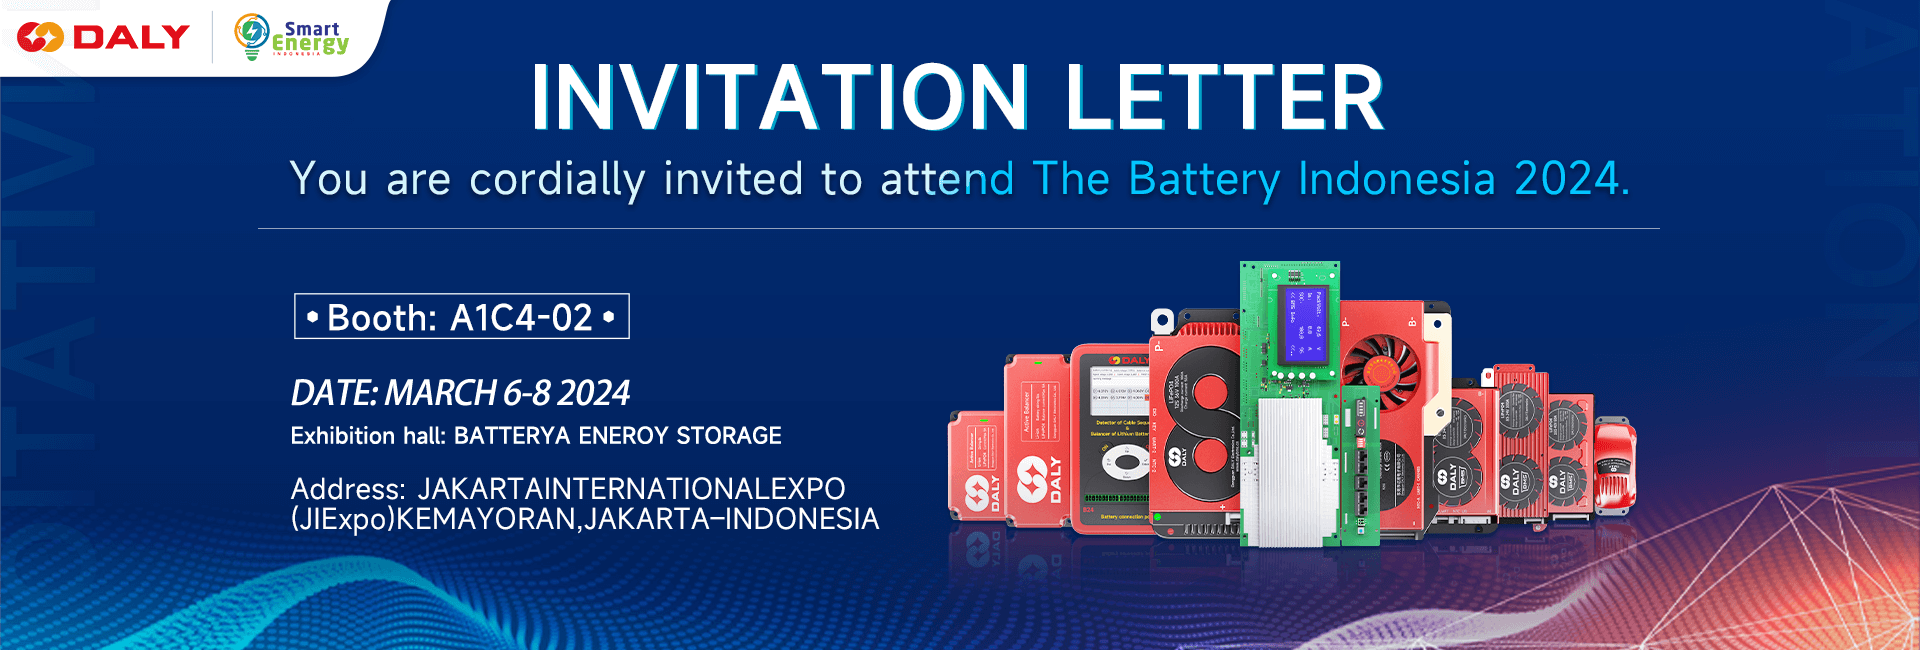 We sincerely invite you to visit our booth in Indonesia’s Battery & Energy Storage Exhibition